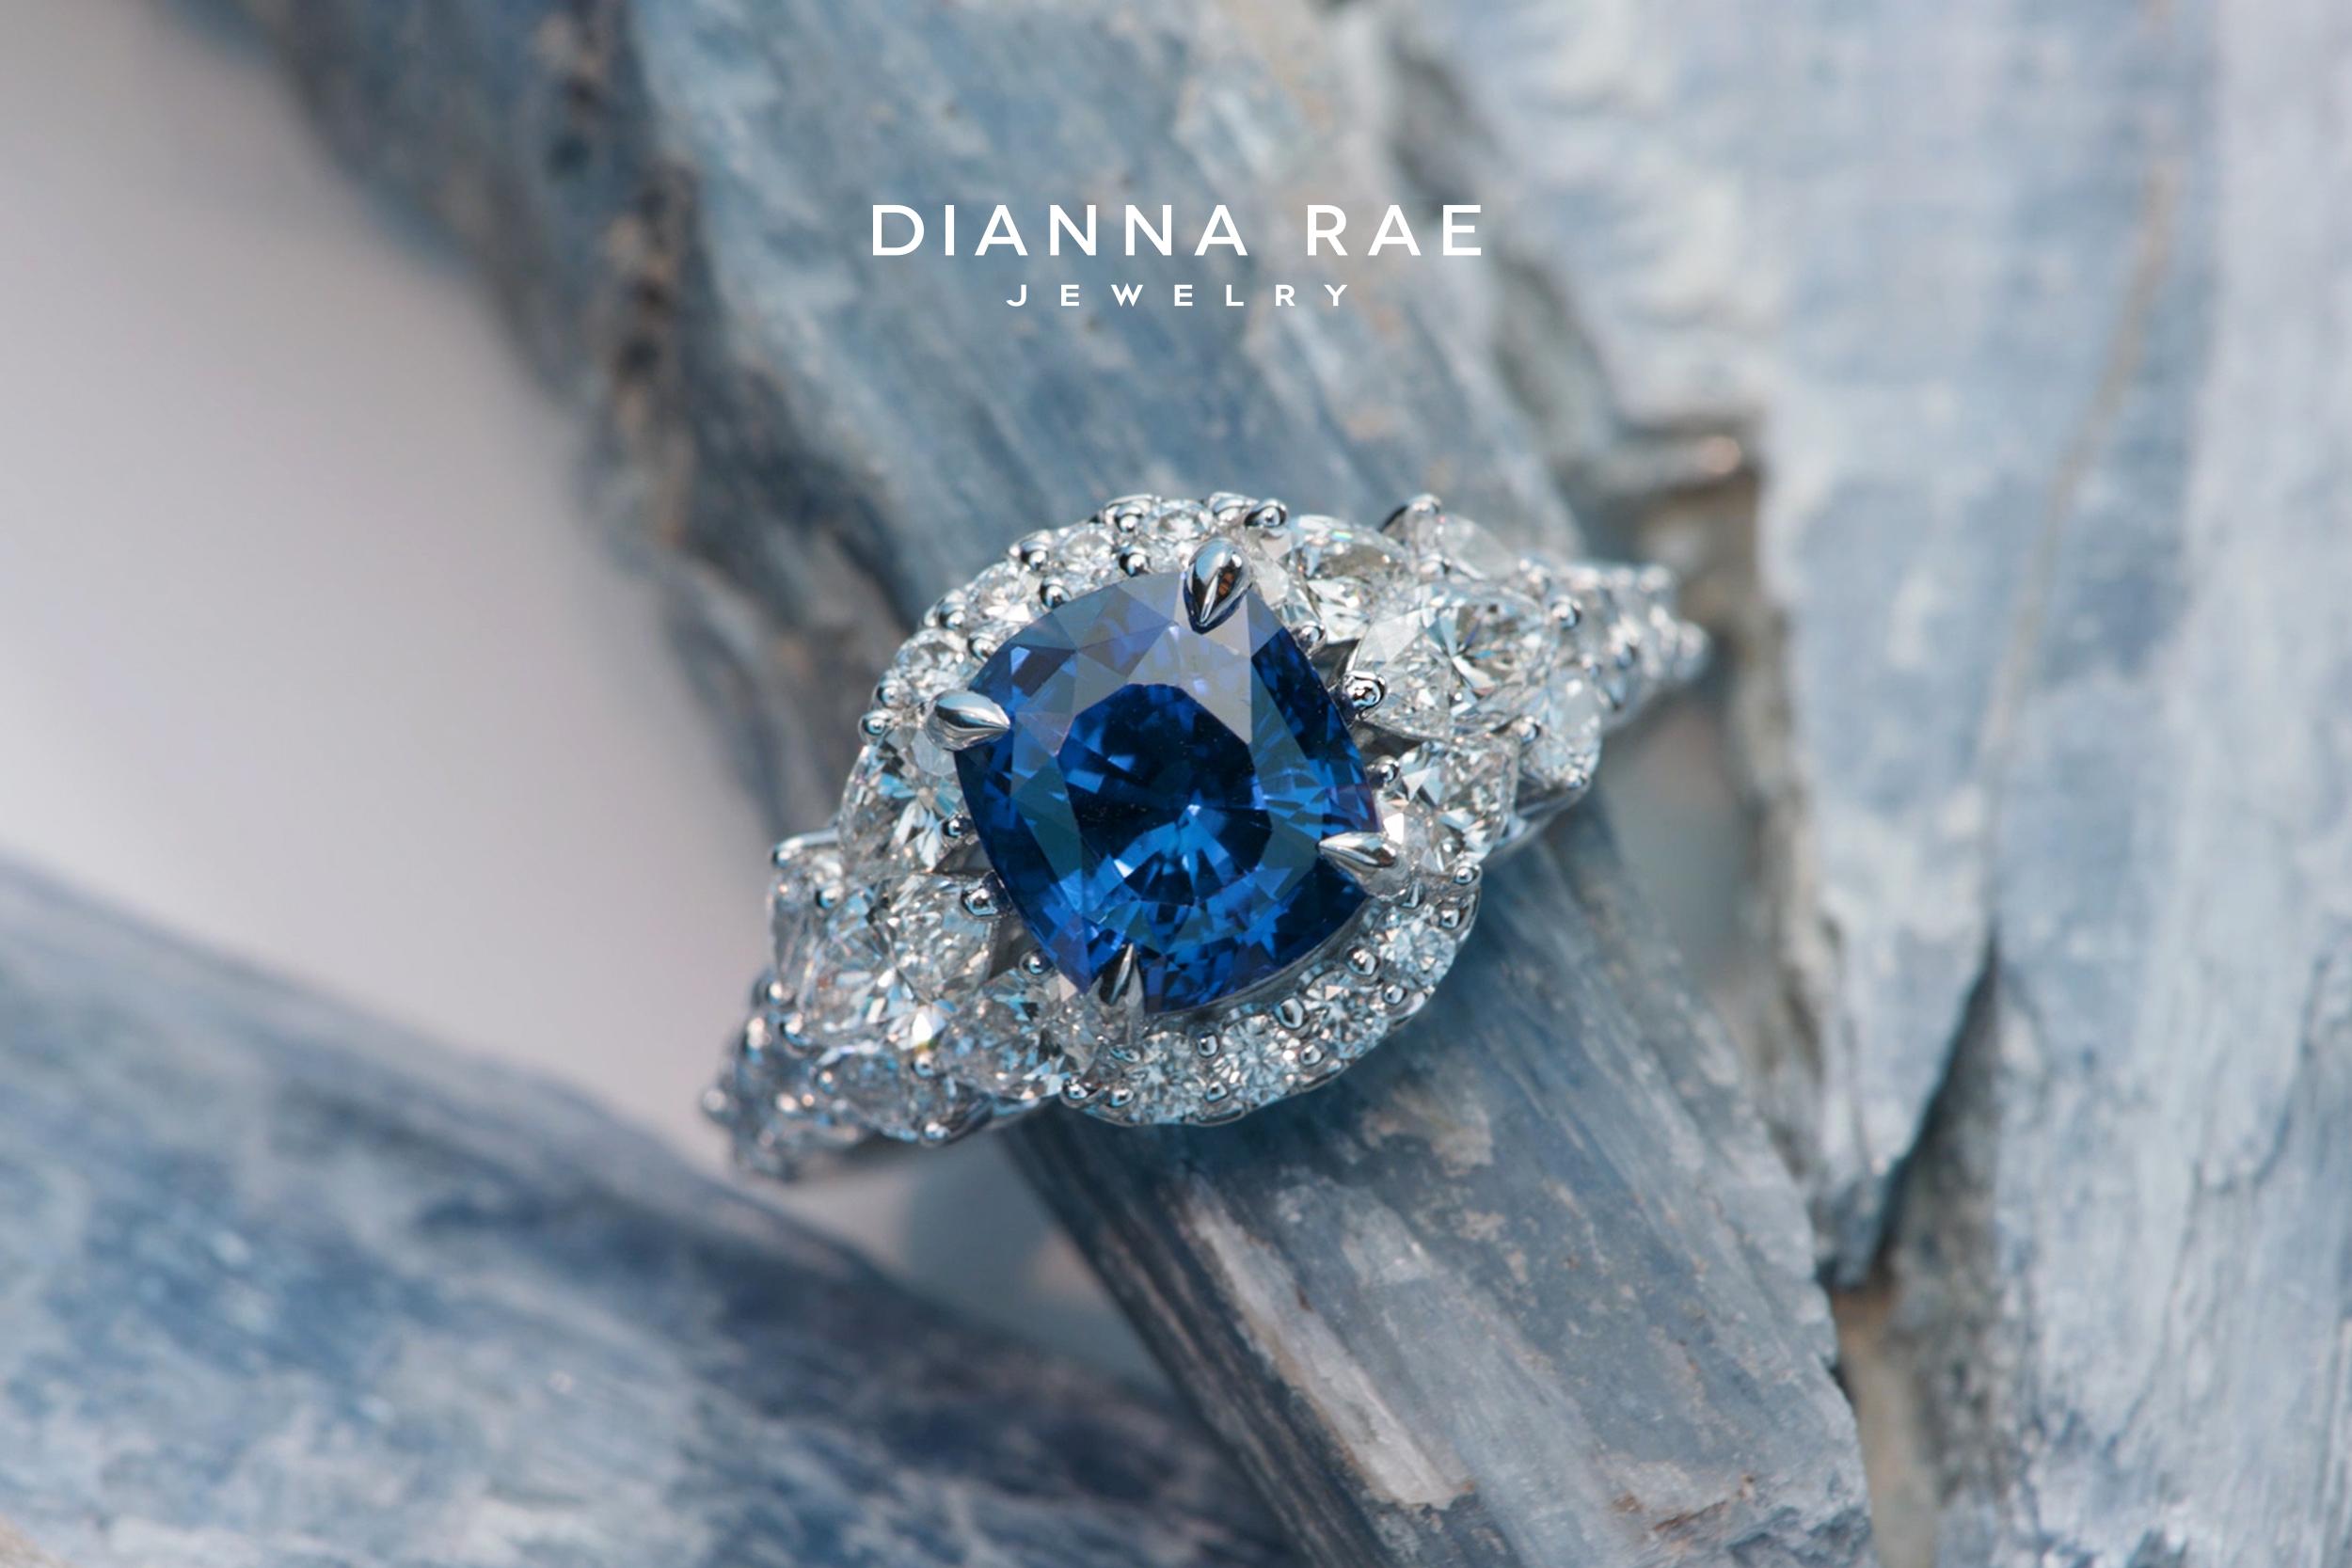 An awe-inspiring Dianna Rae Original design, the ‘Infinite Glacier’—this Sri Lankan Sapphire and Ideal Cut Diamond cocktail ring was inspired to mimic a cascade-like glacier of white ice on either side of the center gemstone. Beautifully crafted in